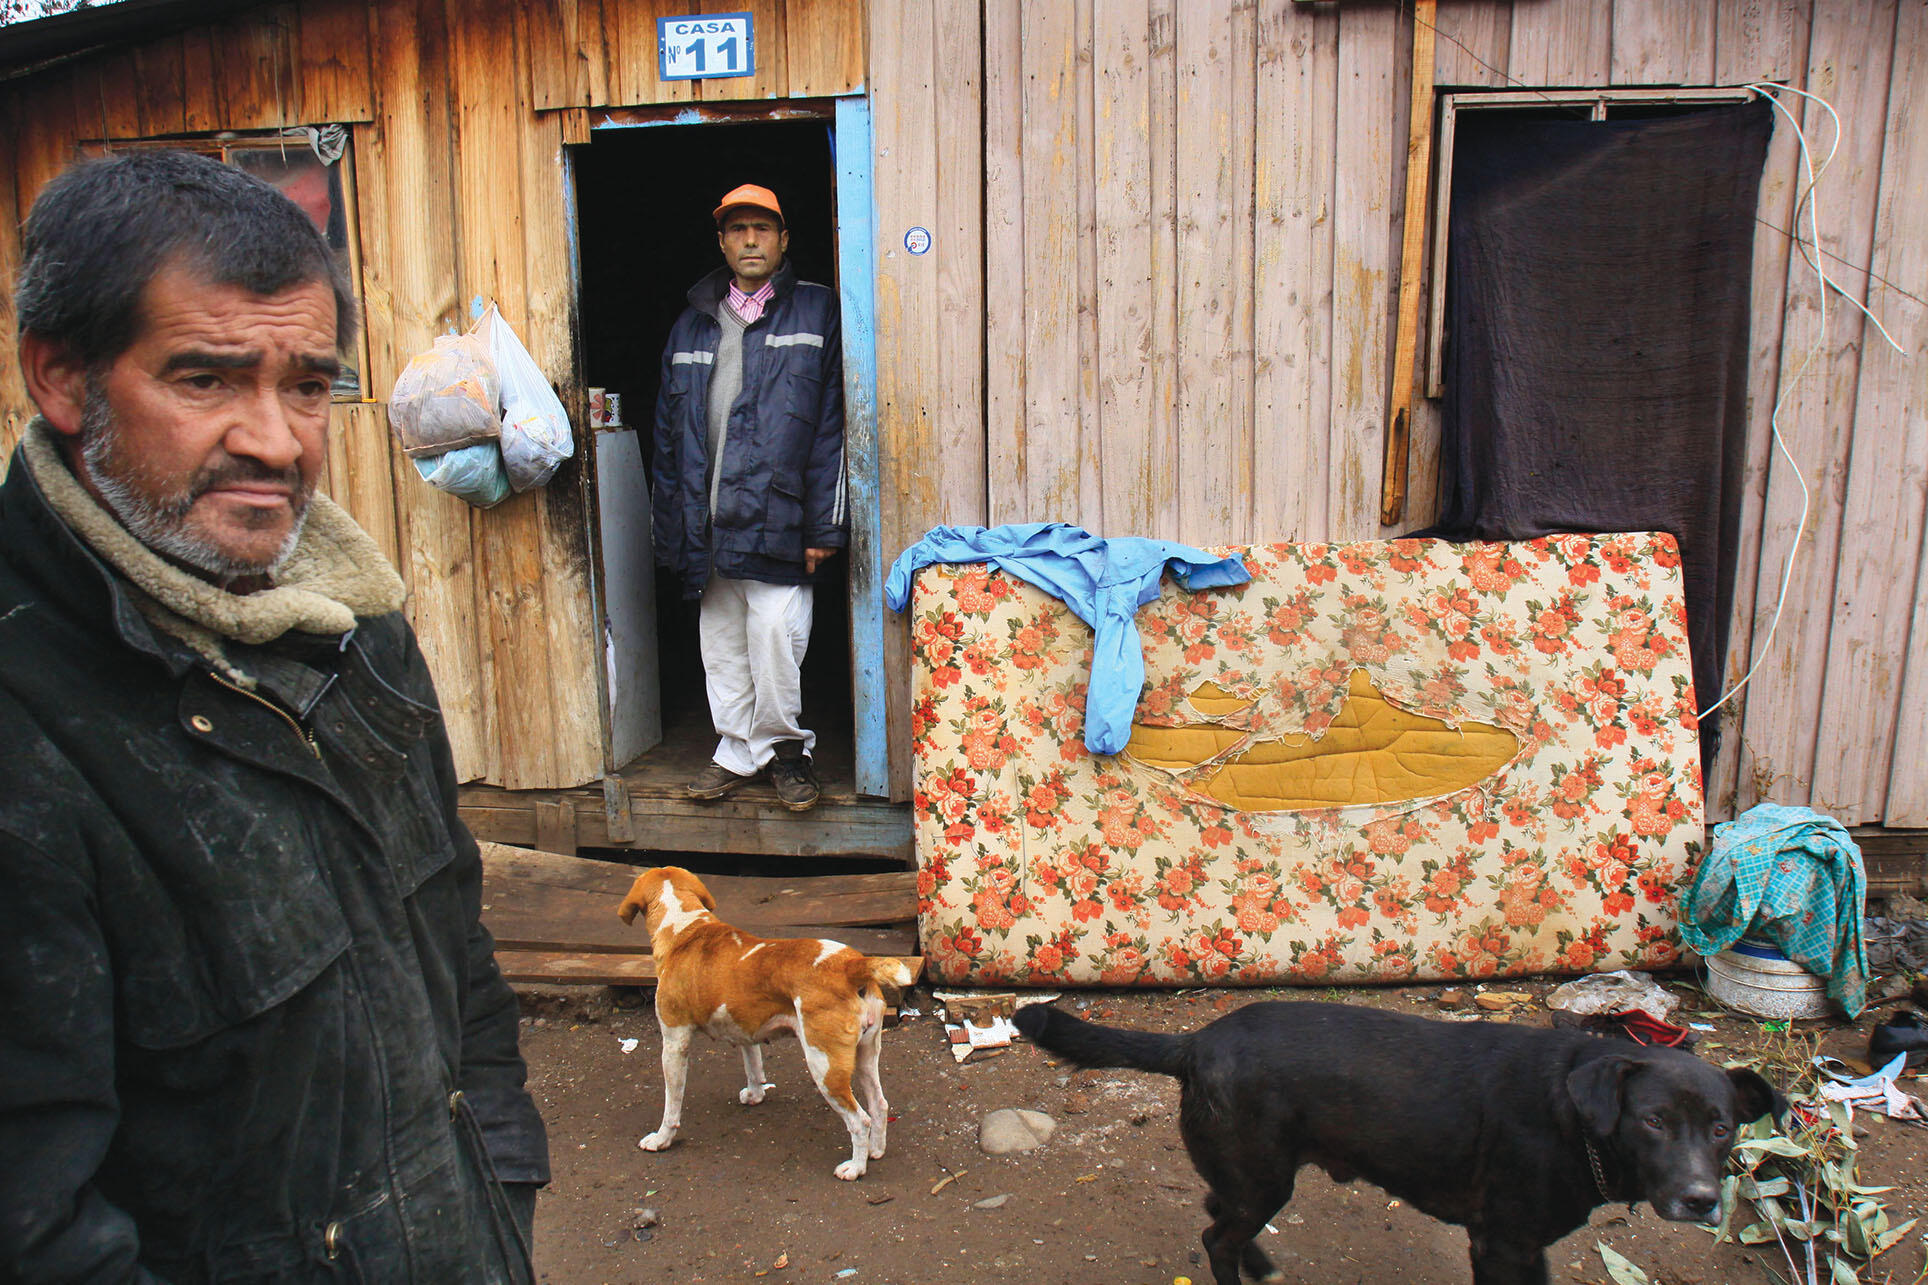 Two men and dogs outside a shack in El Peñon, a shantytown in the Puente Alto sector of Santiago, is home to those left behind. (Photo by Victor Ruiz Caballero/Associated Press.)